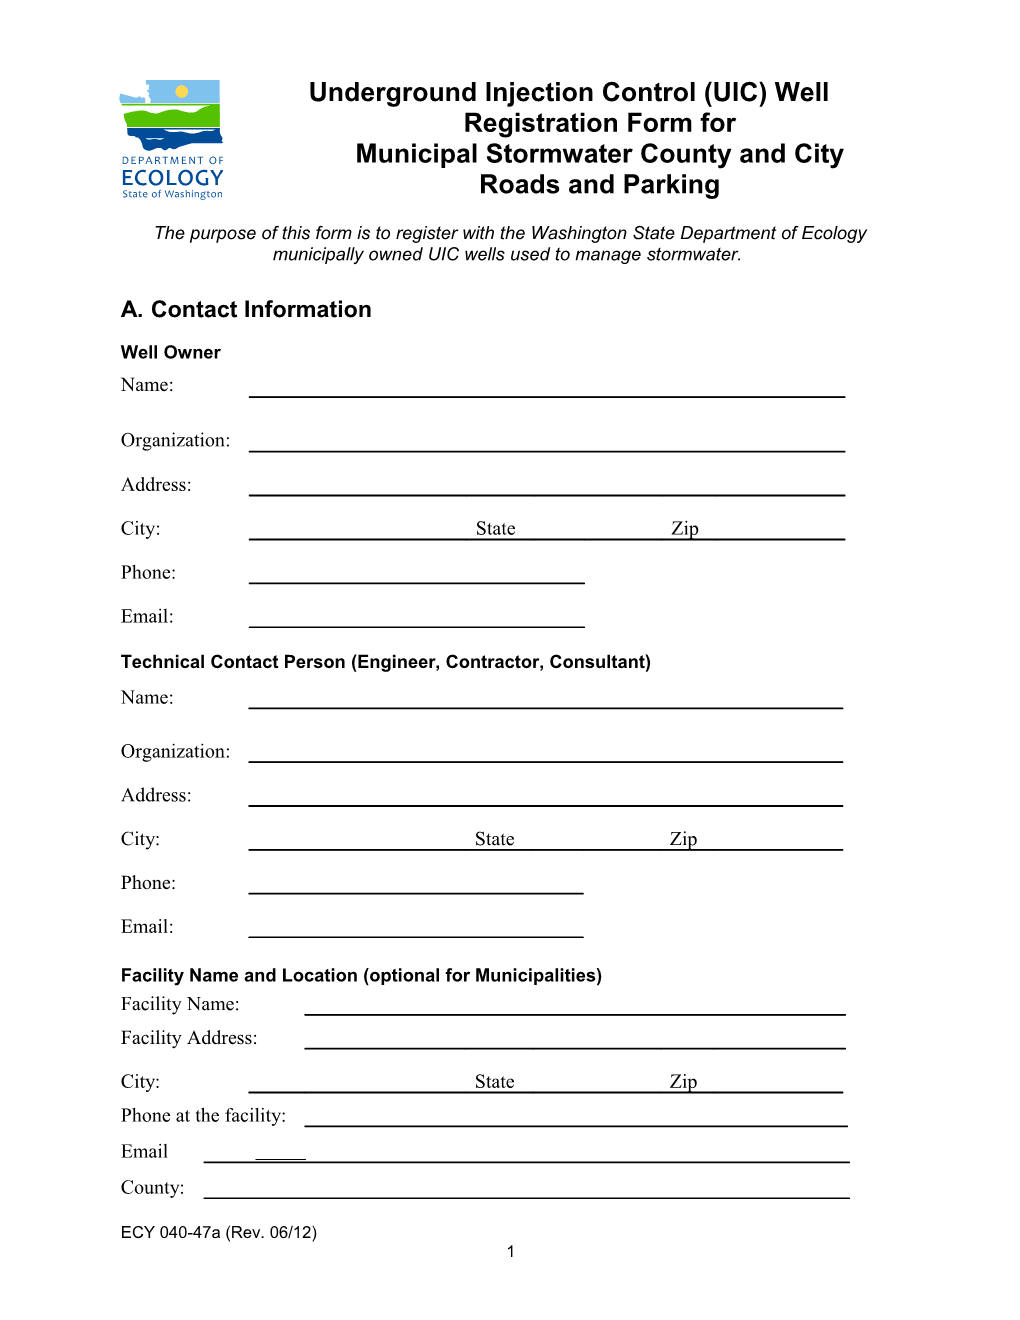 Underground Injection Control (UIC) Well Registration Form for Municipal Stormwater County